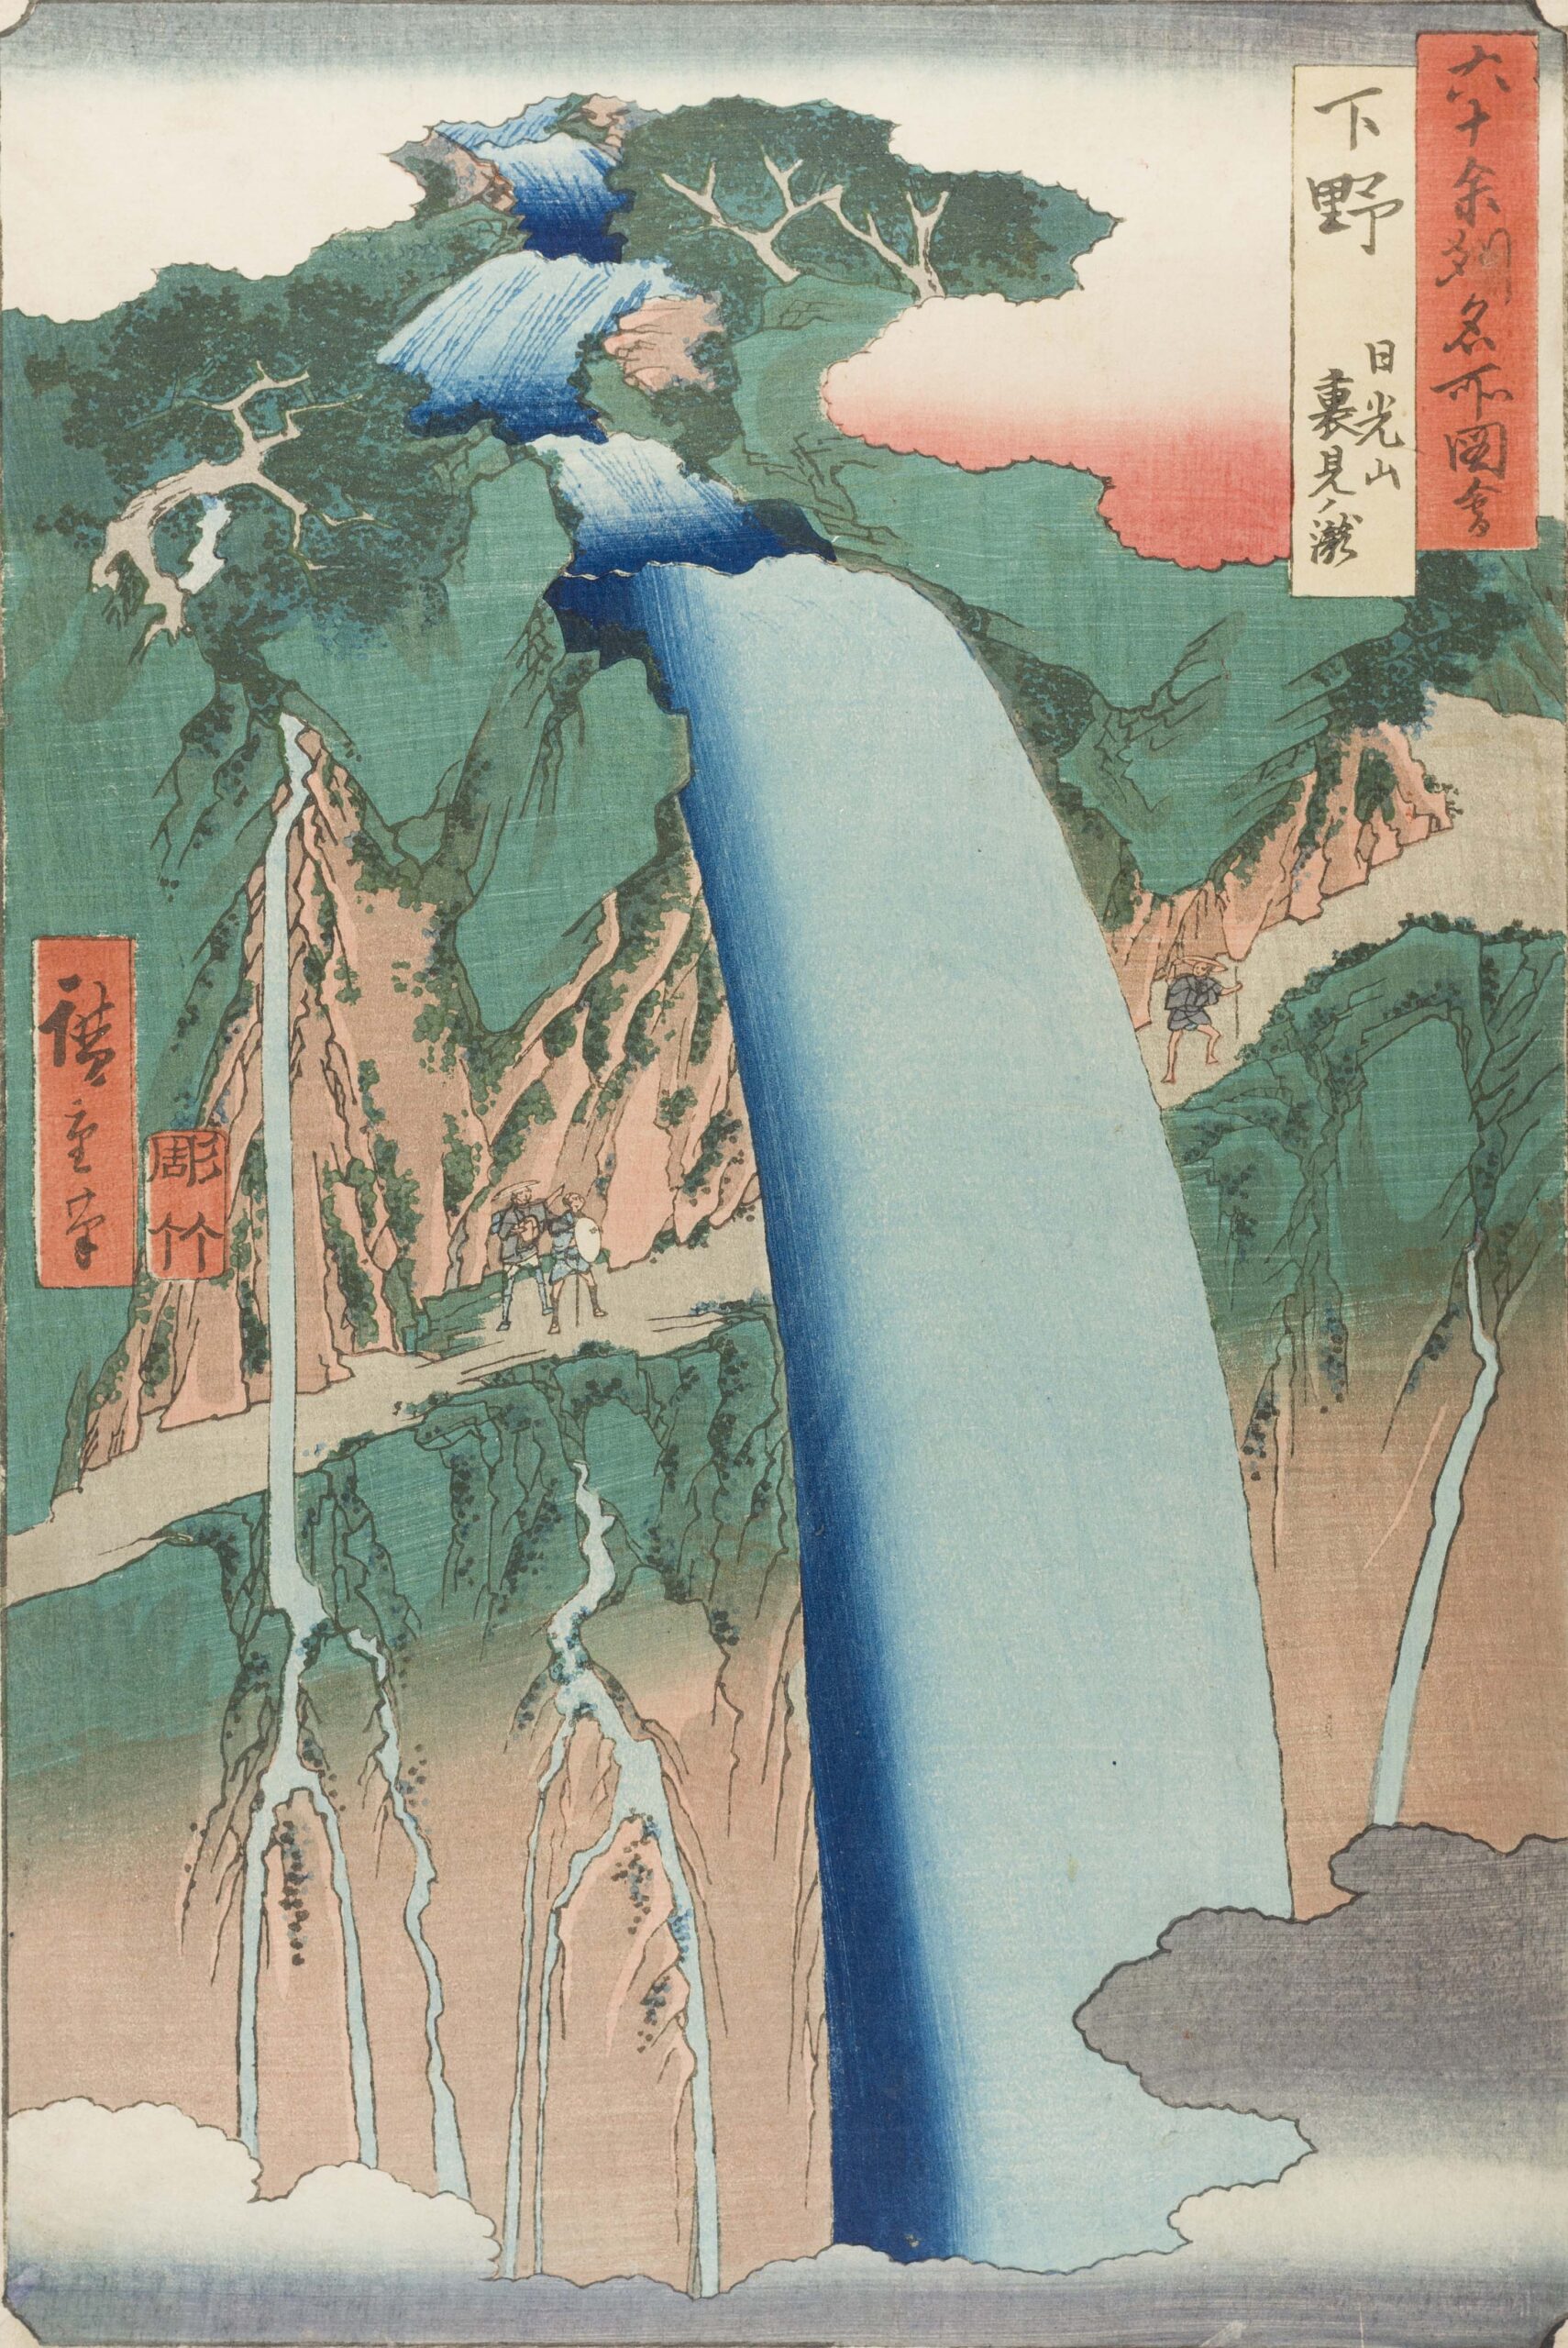 Pictures of the Floating World: Japanese Ukiyo-e Prints - York Art Gallery